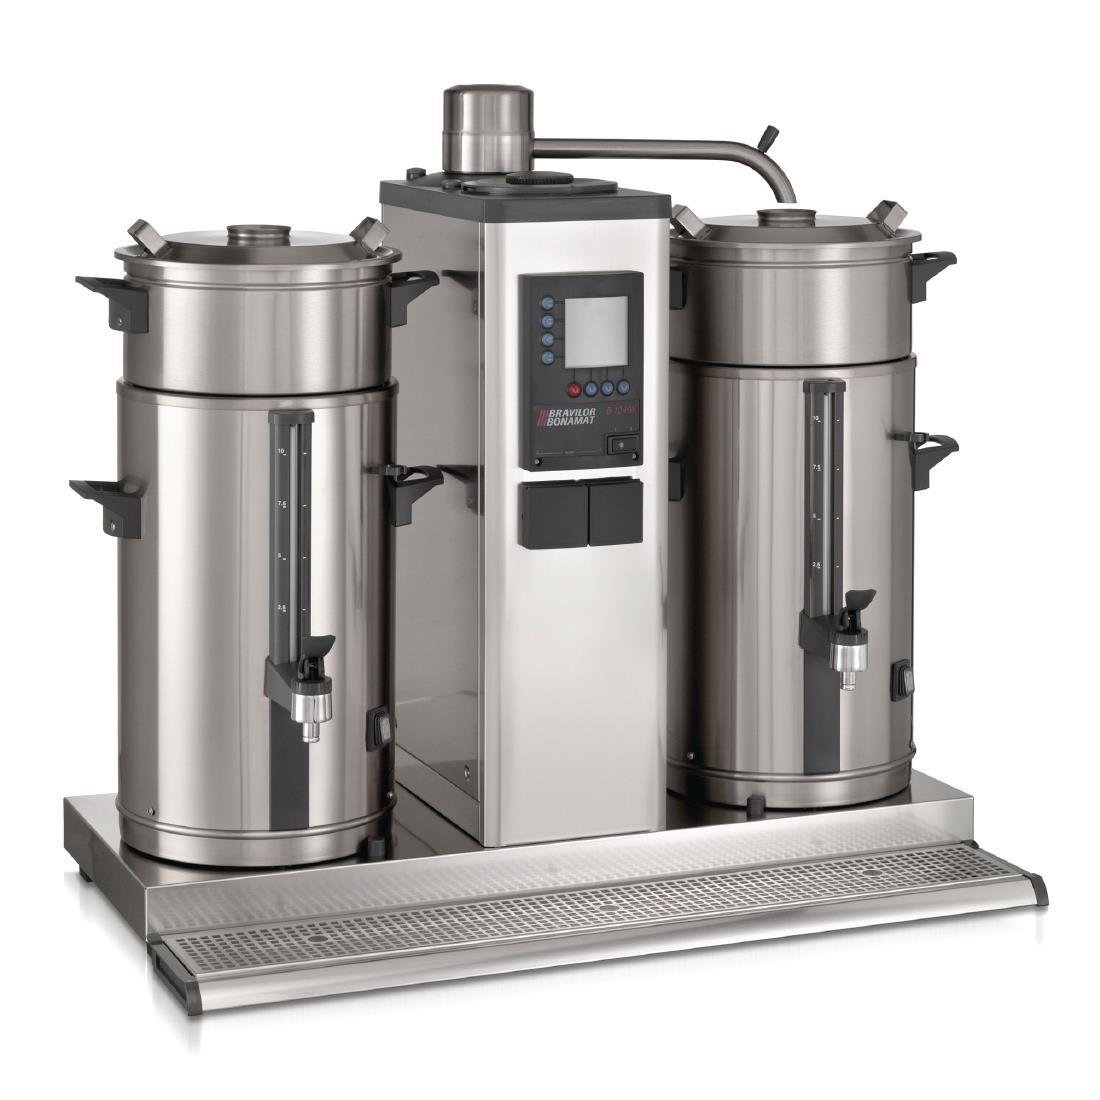 Bravilor B40 Bulk Coffee Brewer with 2x40Ltr Coffee Urns 3 Phase - DC684  - 3